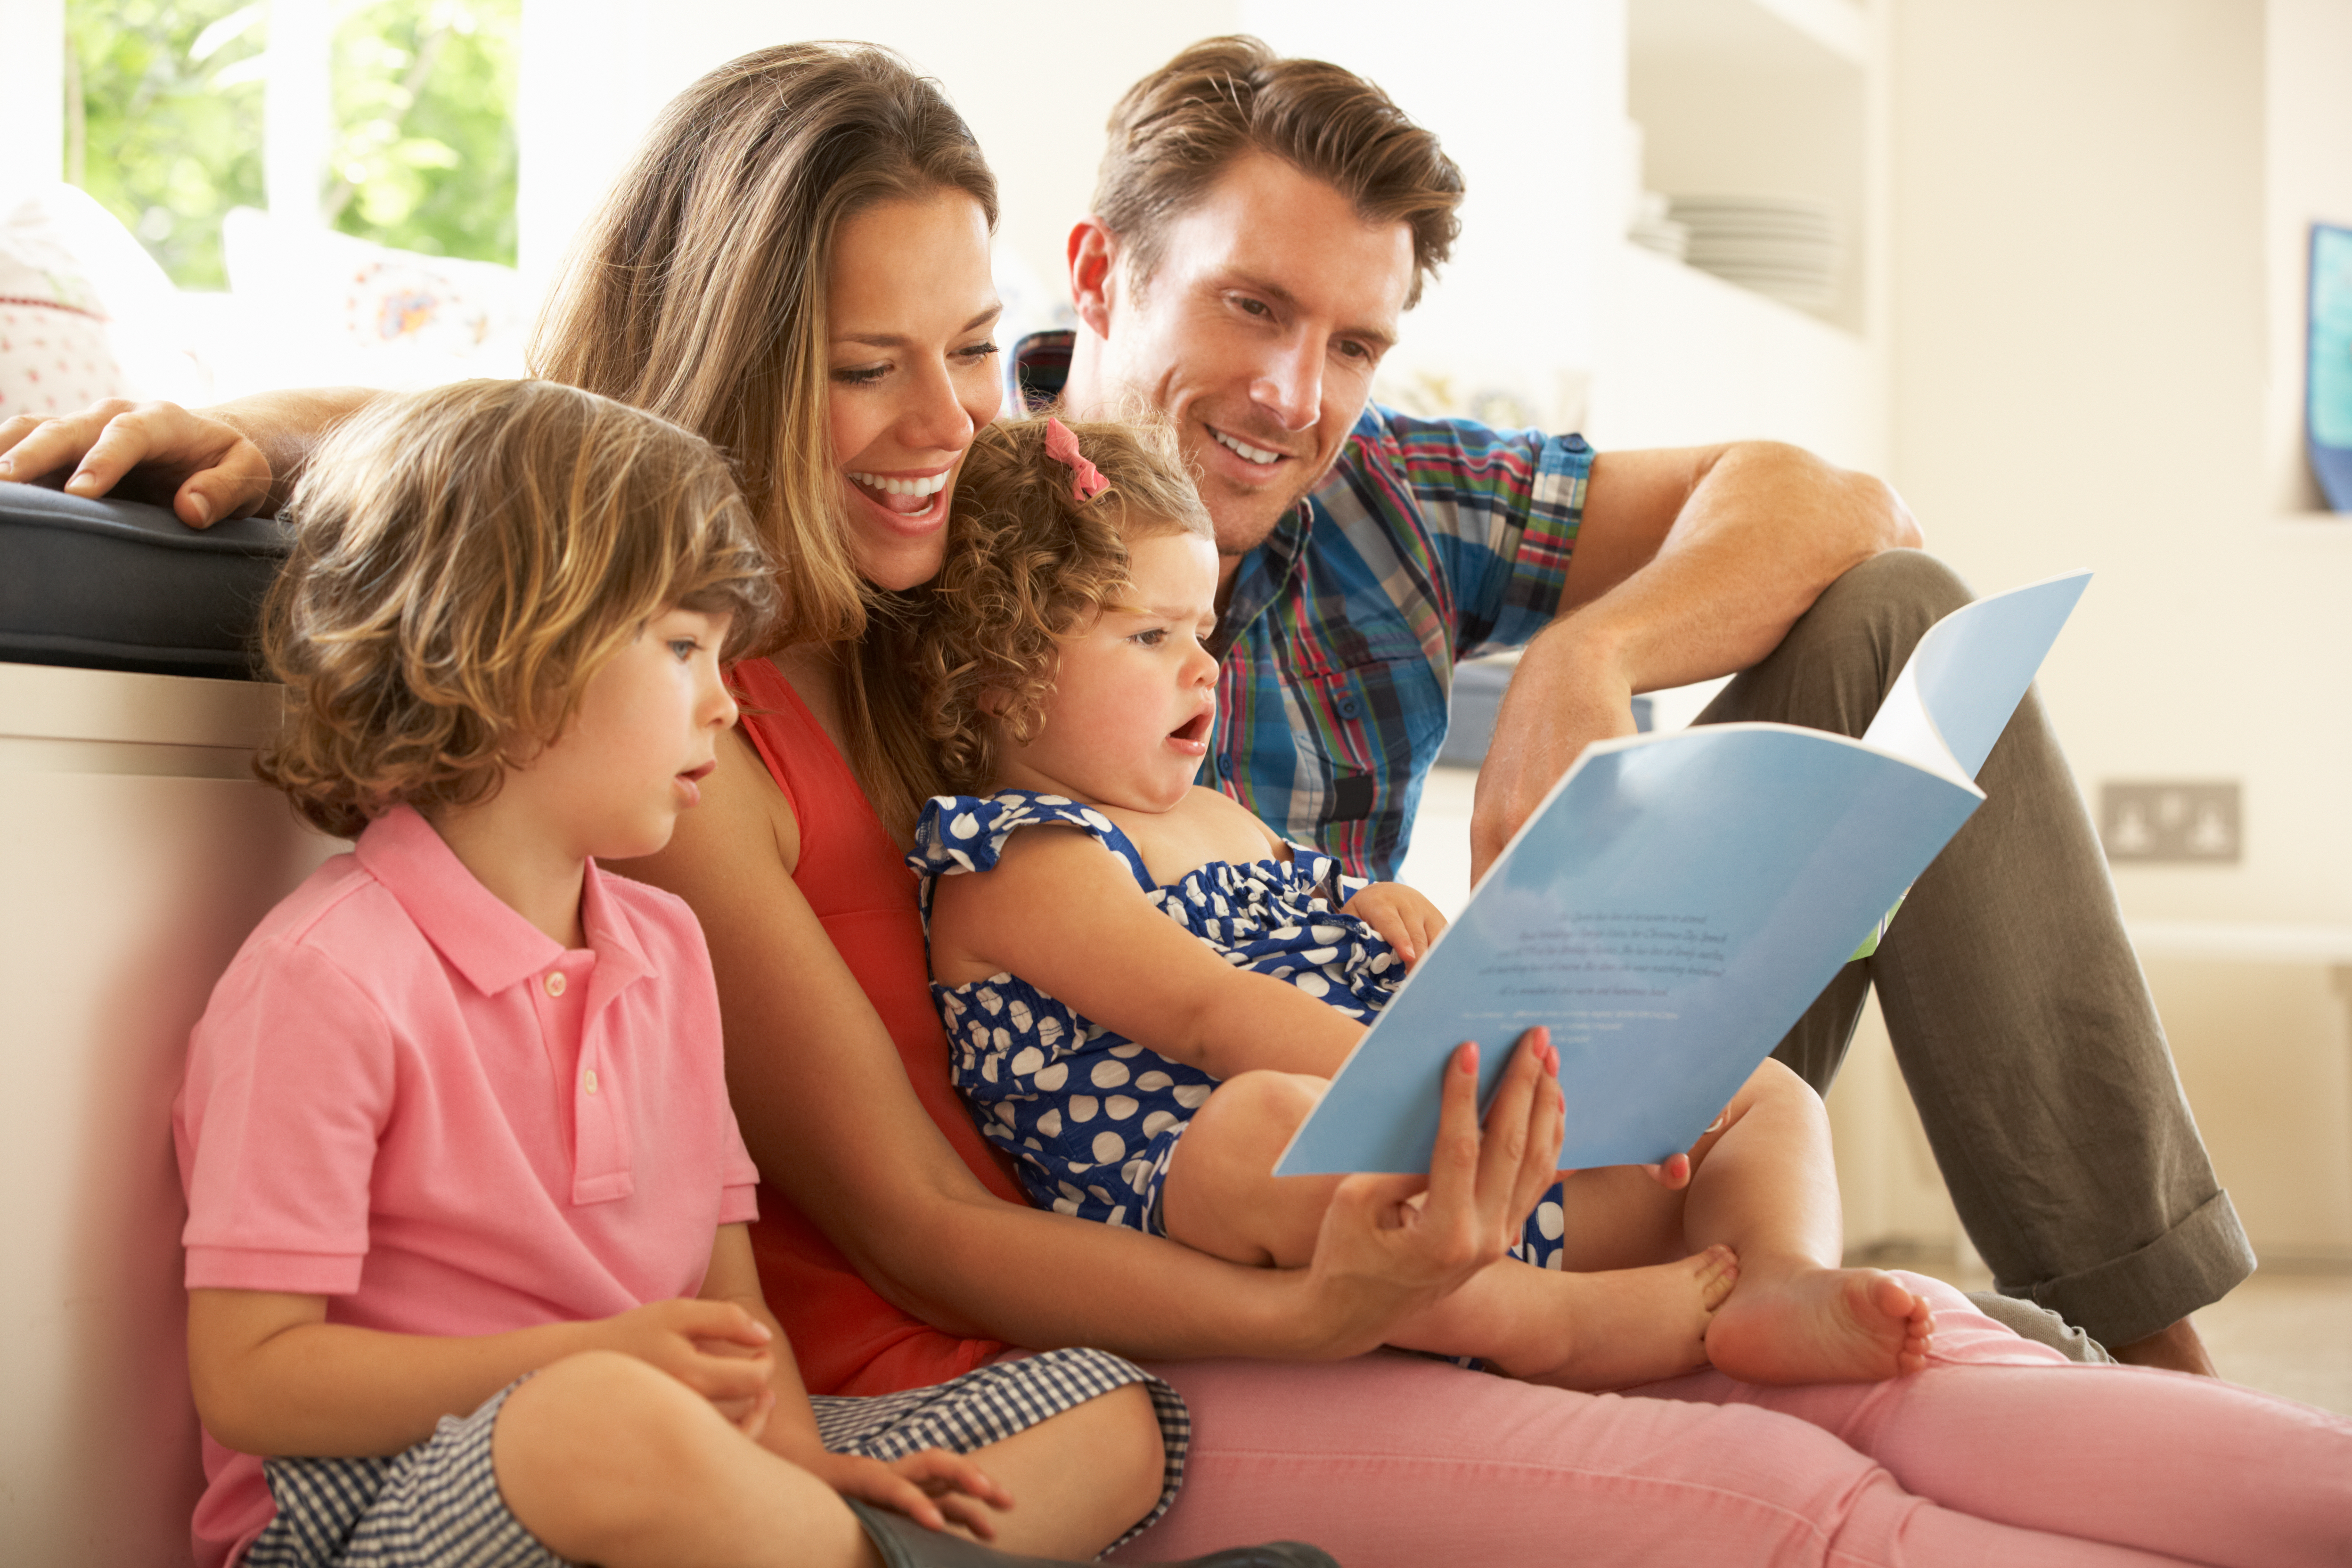 A family reading a book together | Source: Shutterstock